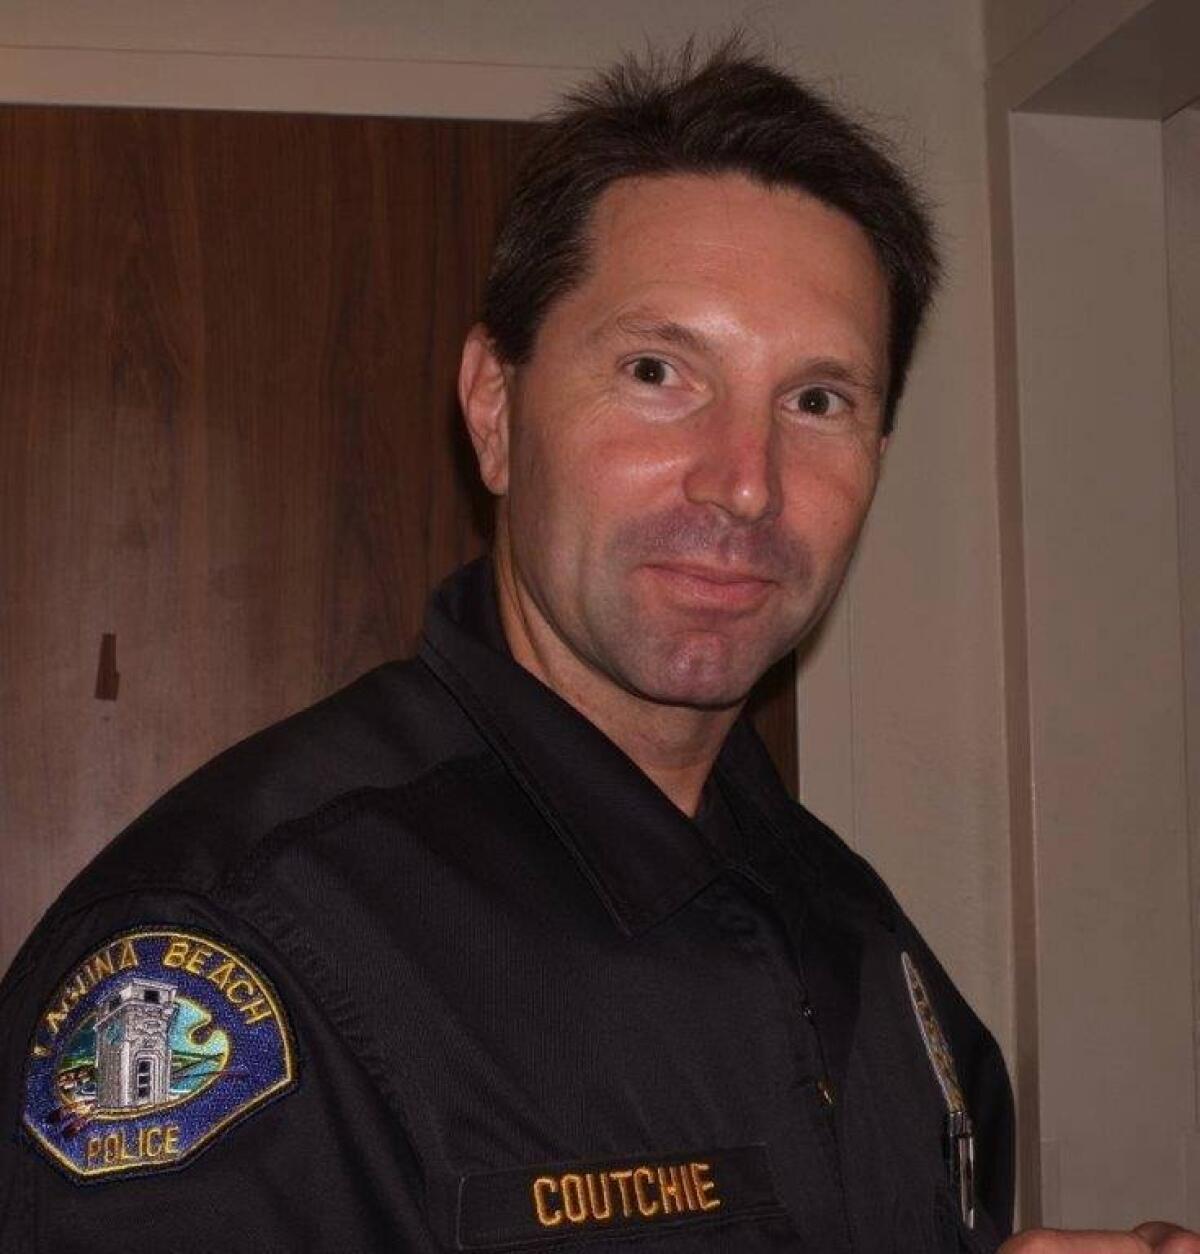 Jon Coutchie was a motor officer for the Laguna Beach police department. He graduated from Laguna Hills High in 1989.